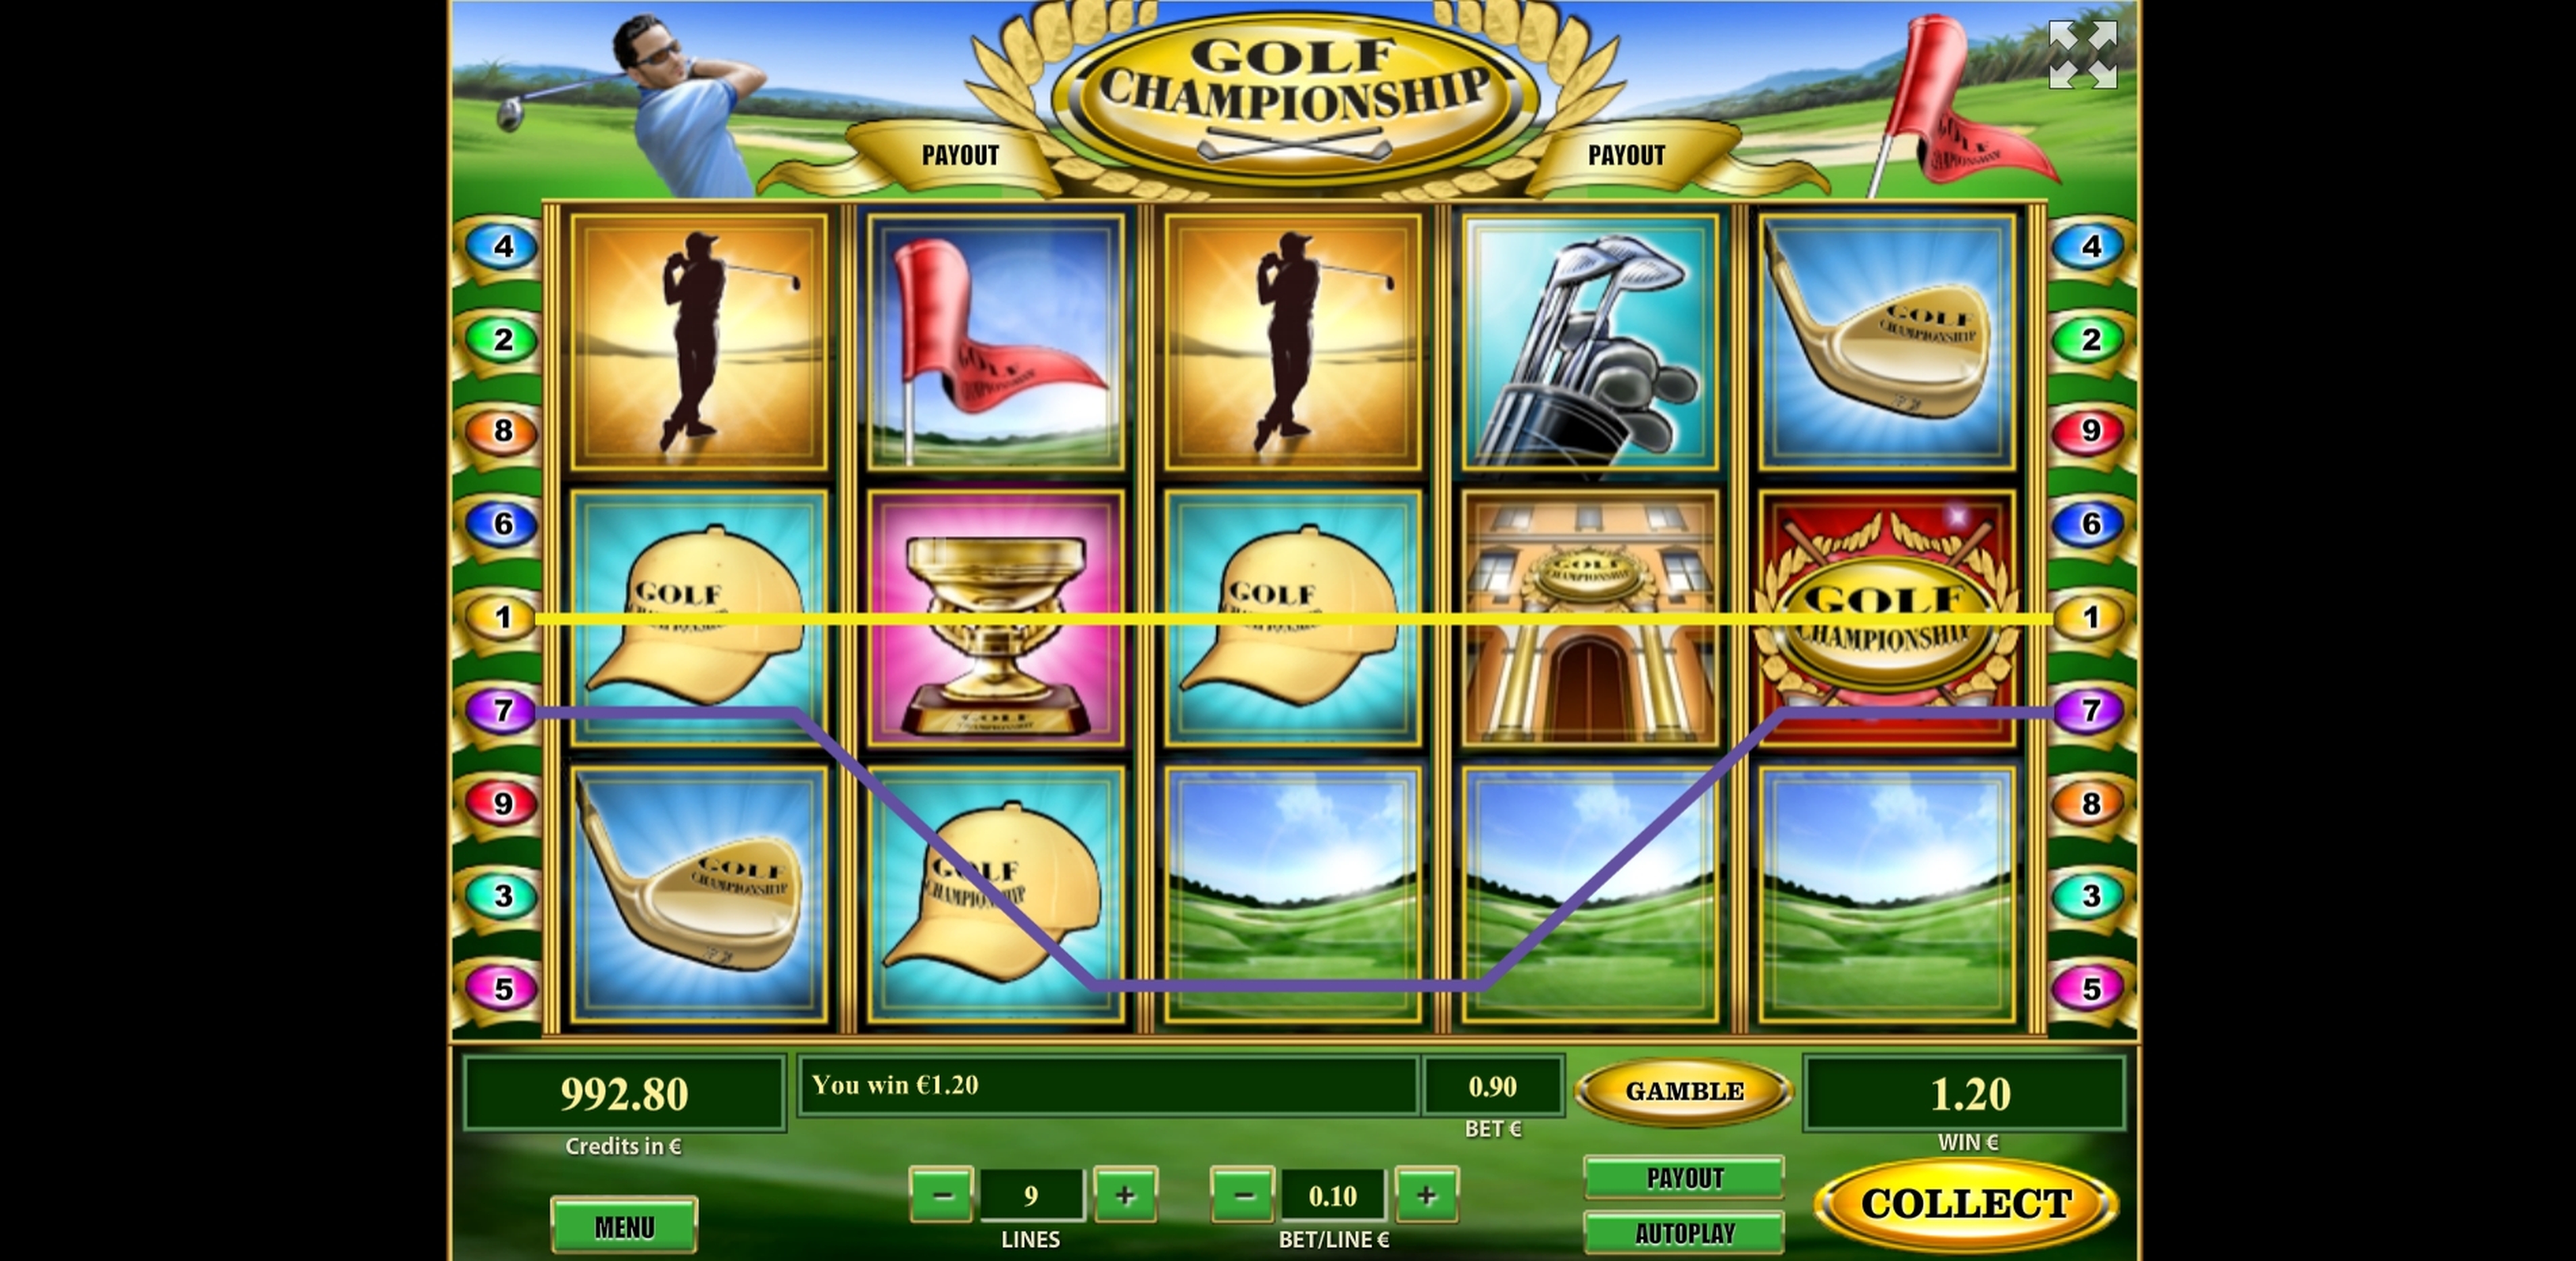 Win Money in Golf Championship Free Slot Game by Tom Horn Gaming